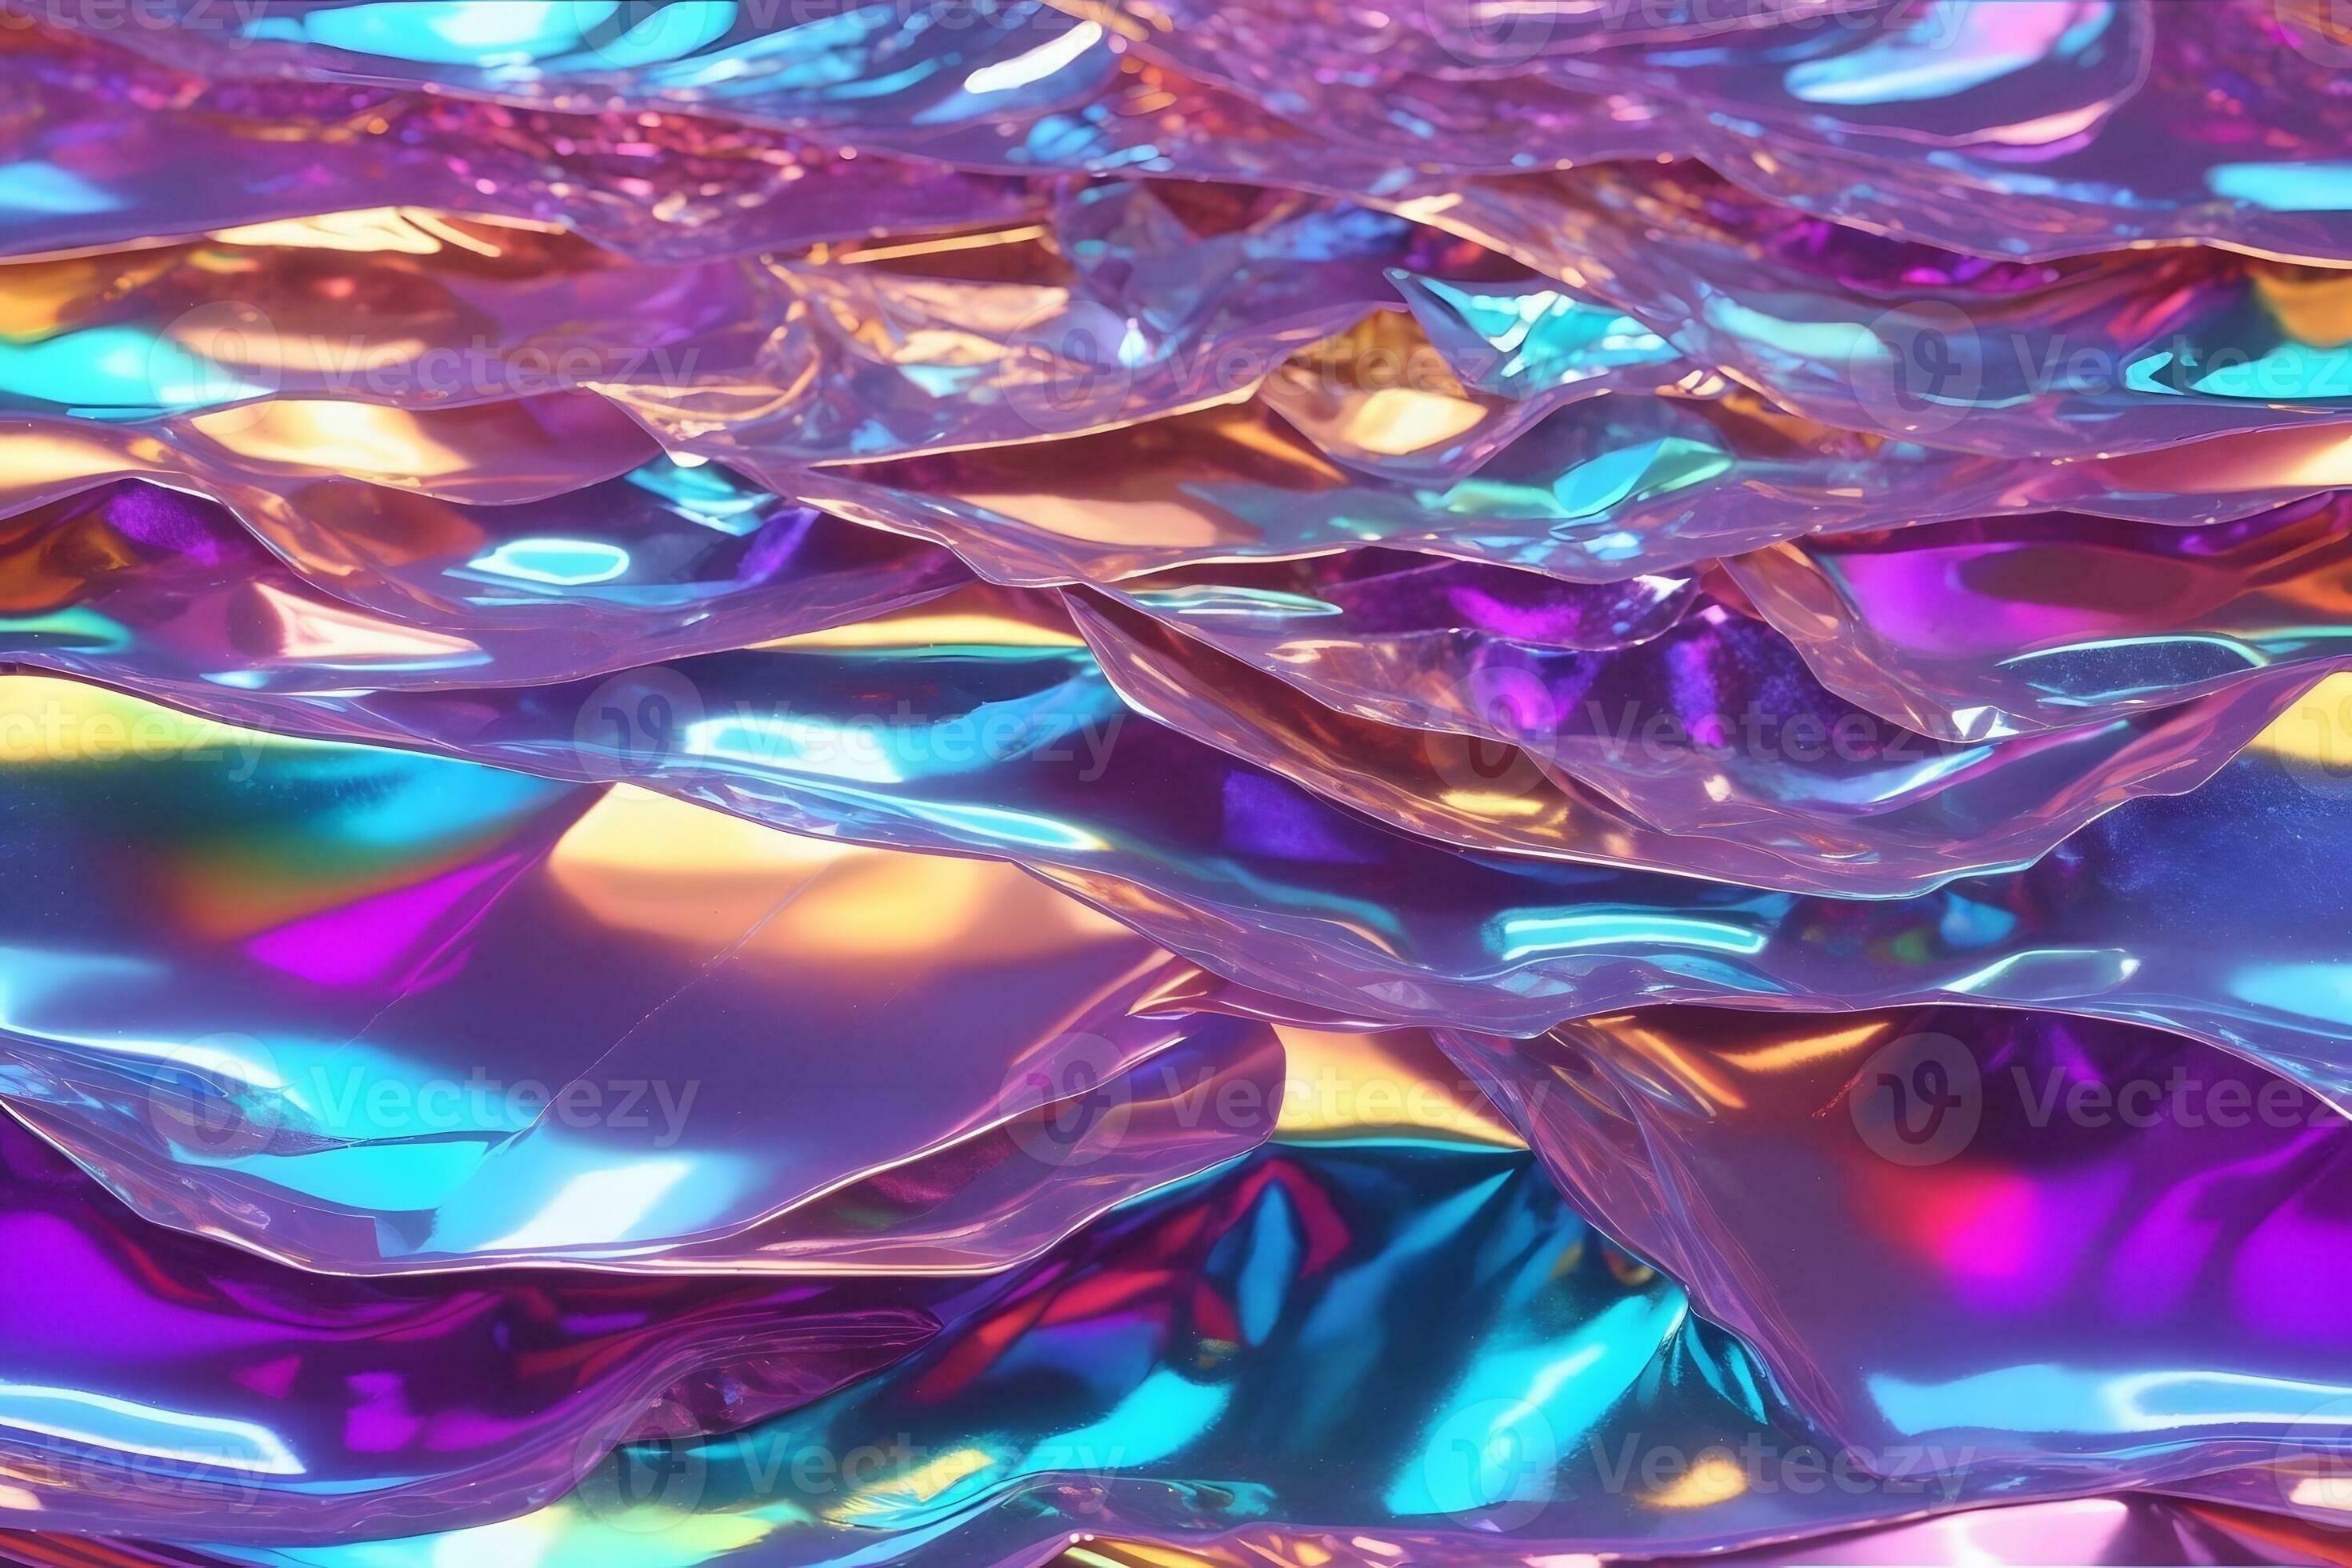 Holographic Glossy Foil Paper, Holographic Iridescent Foil Texture